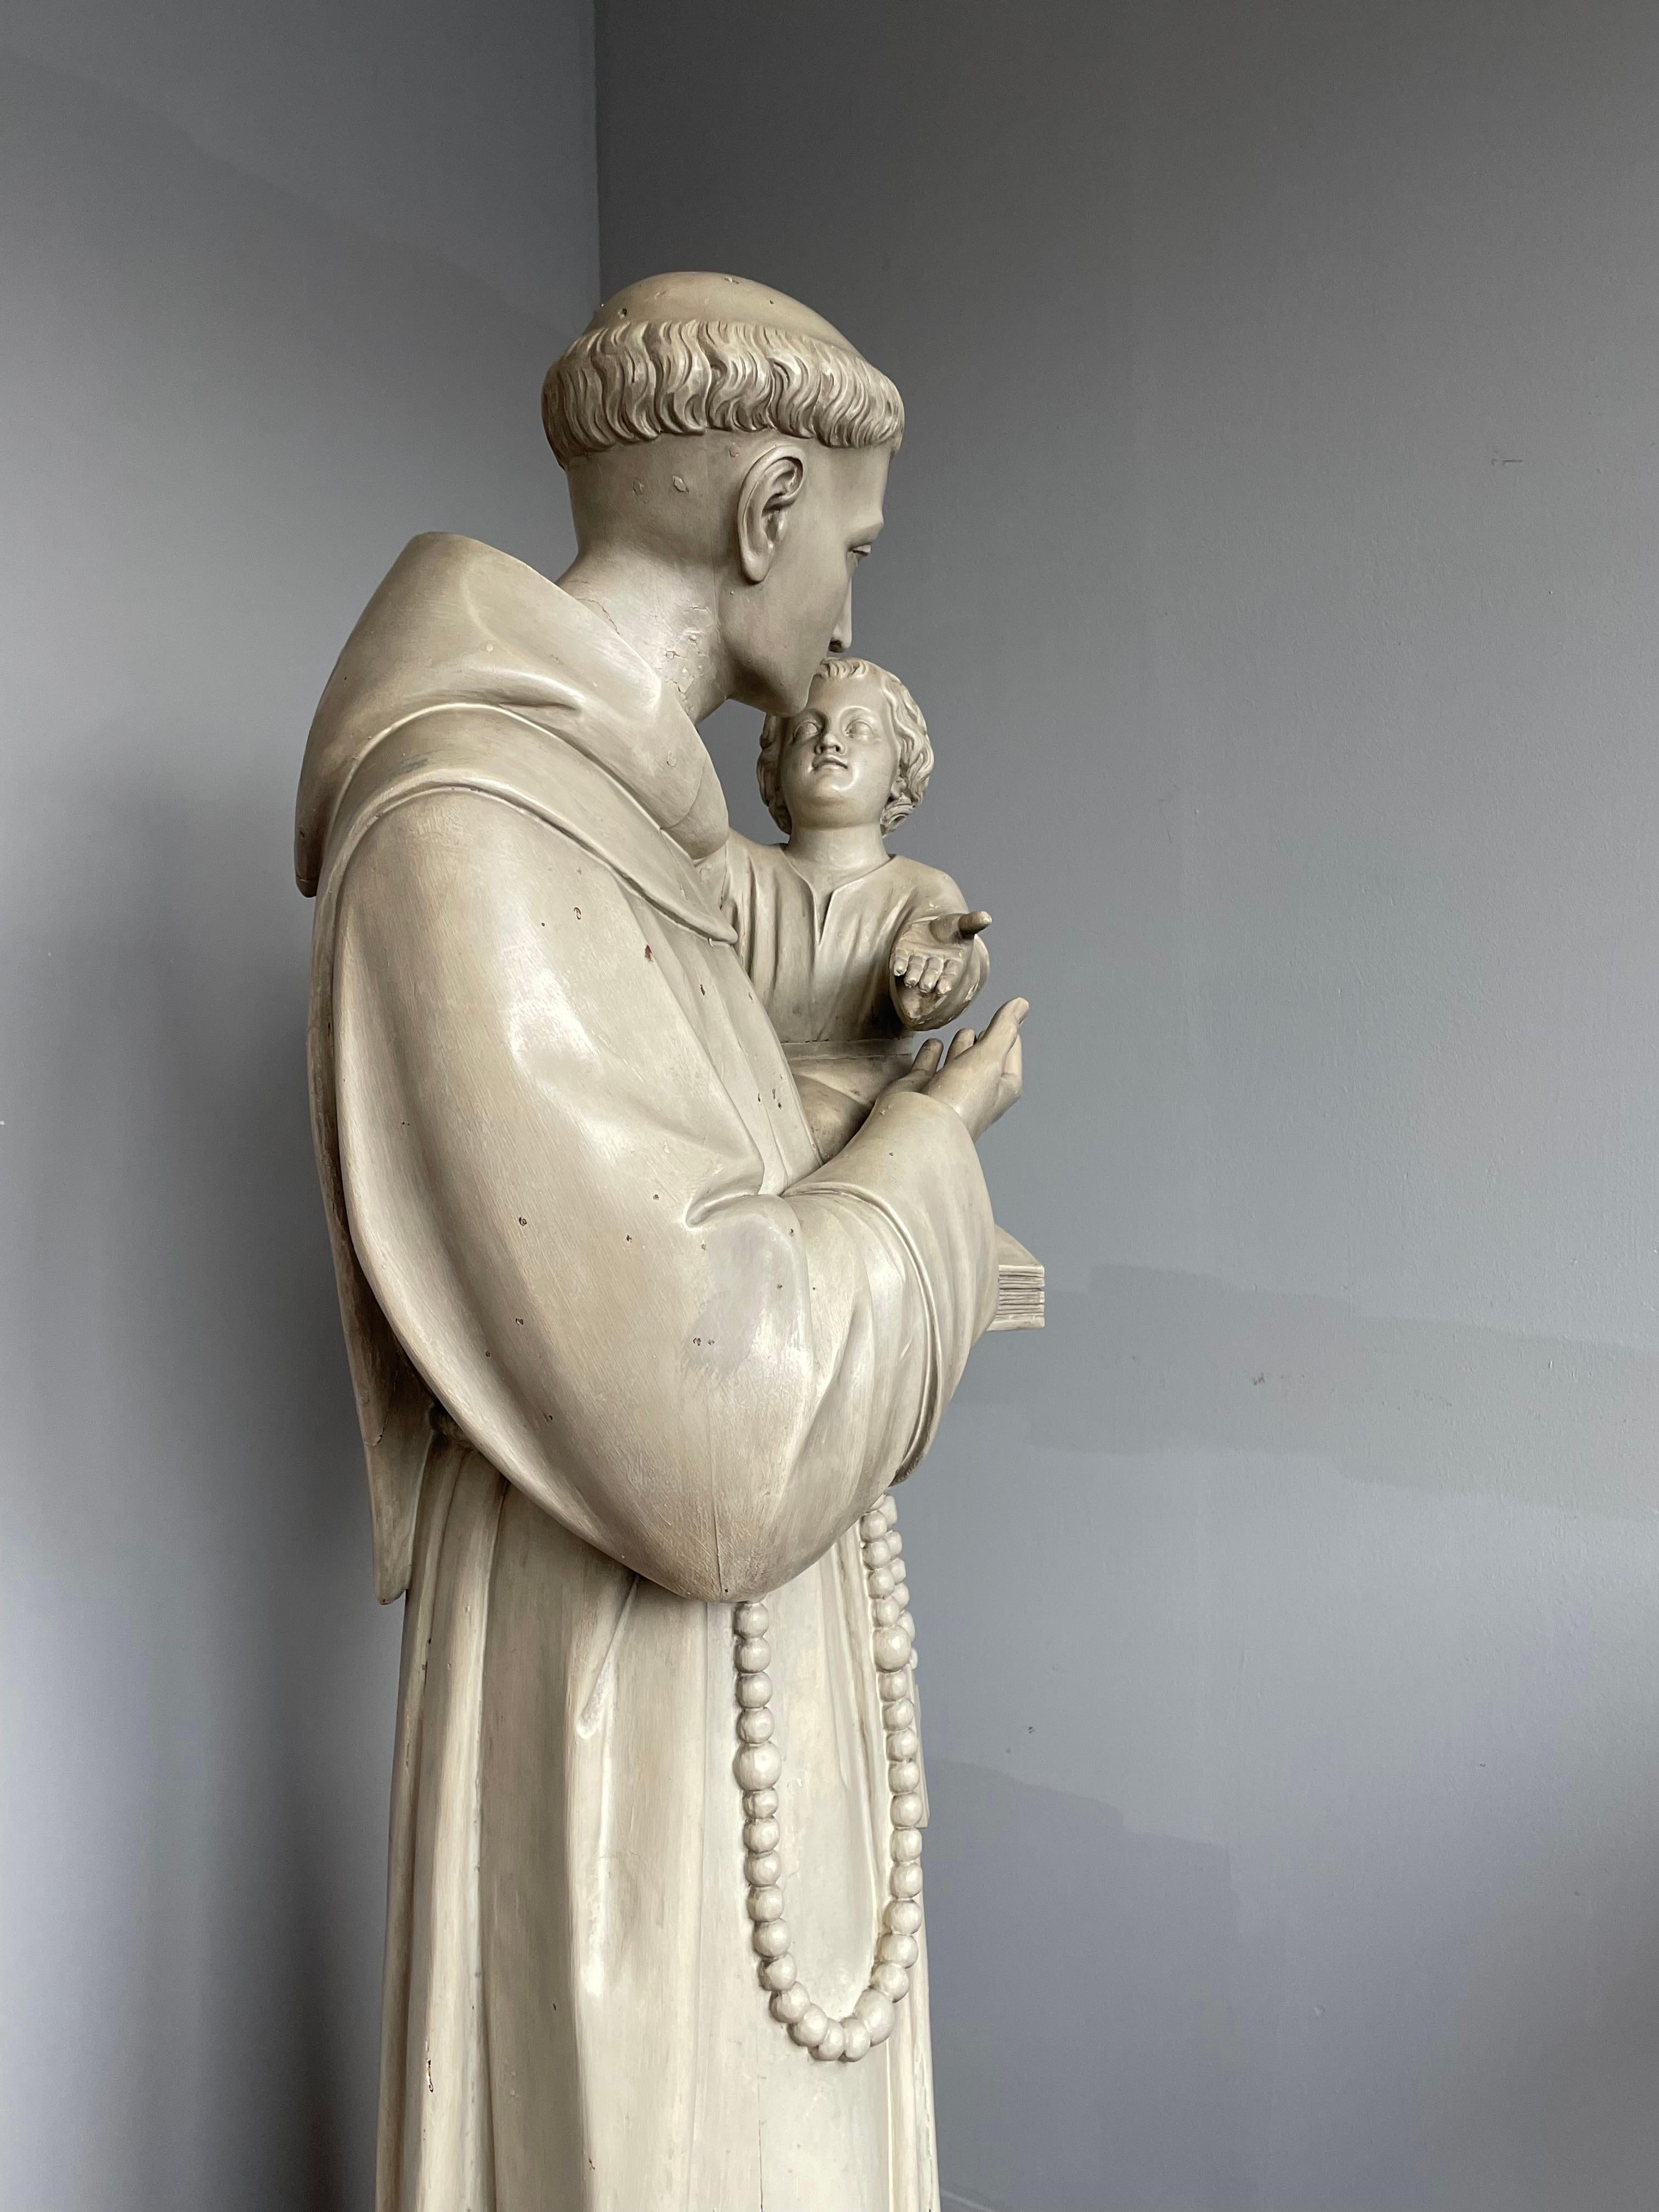 Antique and Large Hand Carved Wooden Saint Anthony of Padua Statue / Sculpture For Sale 7